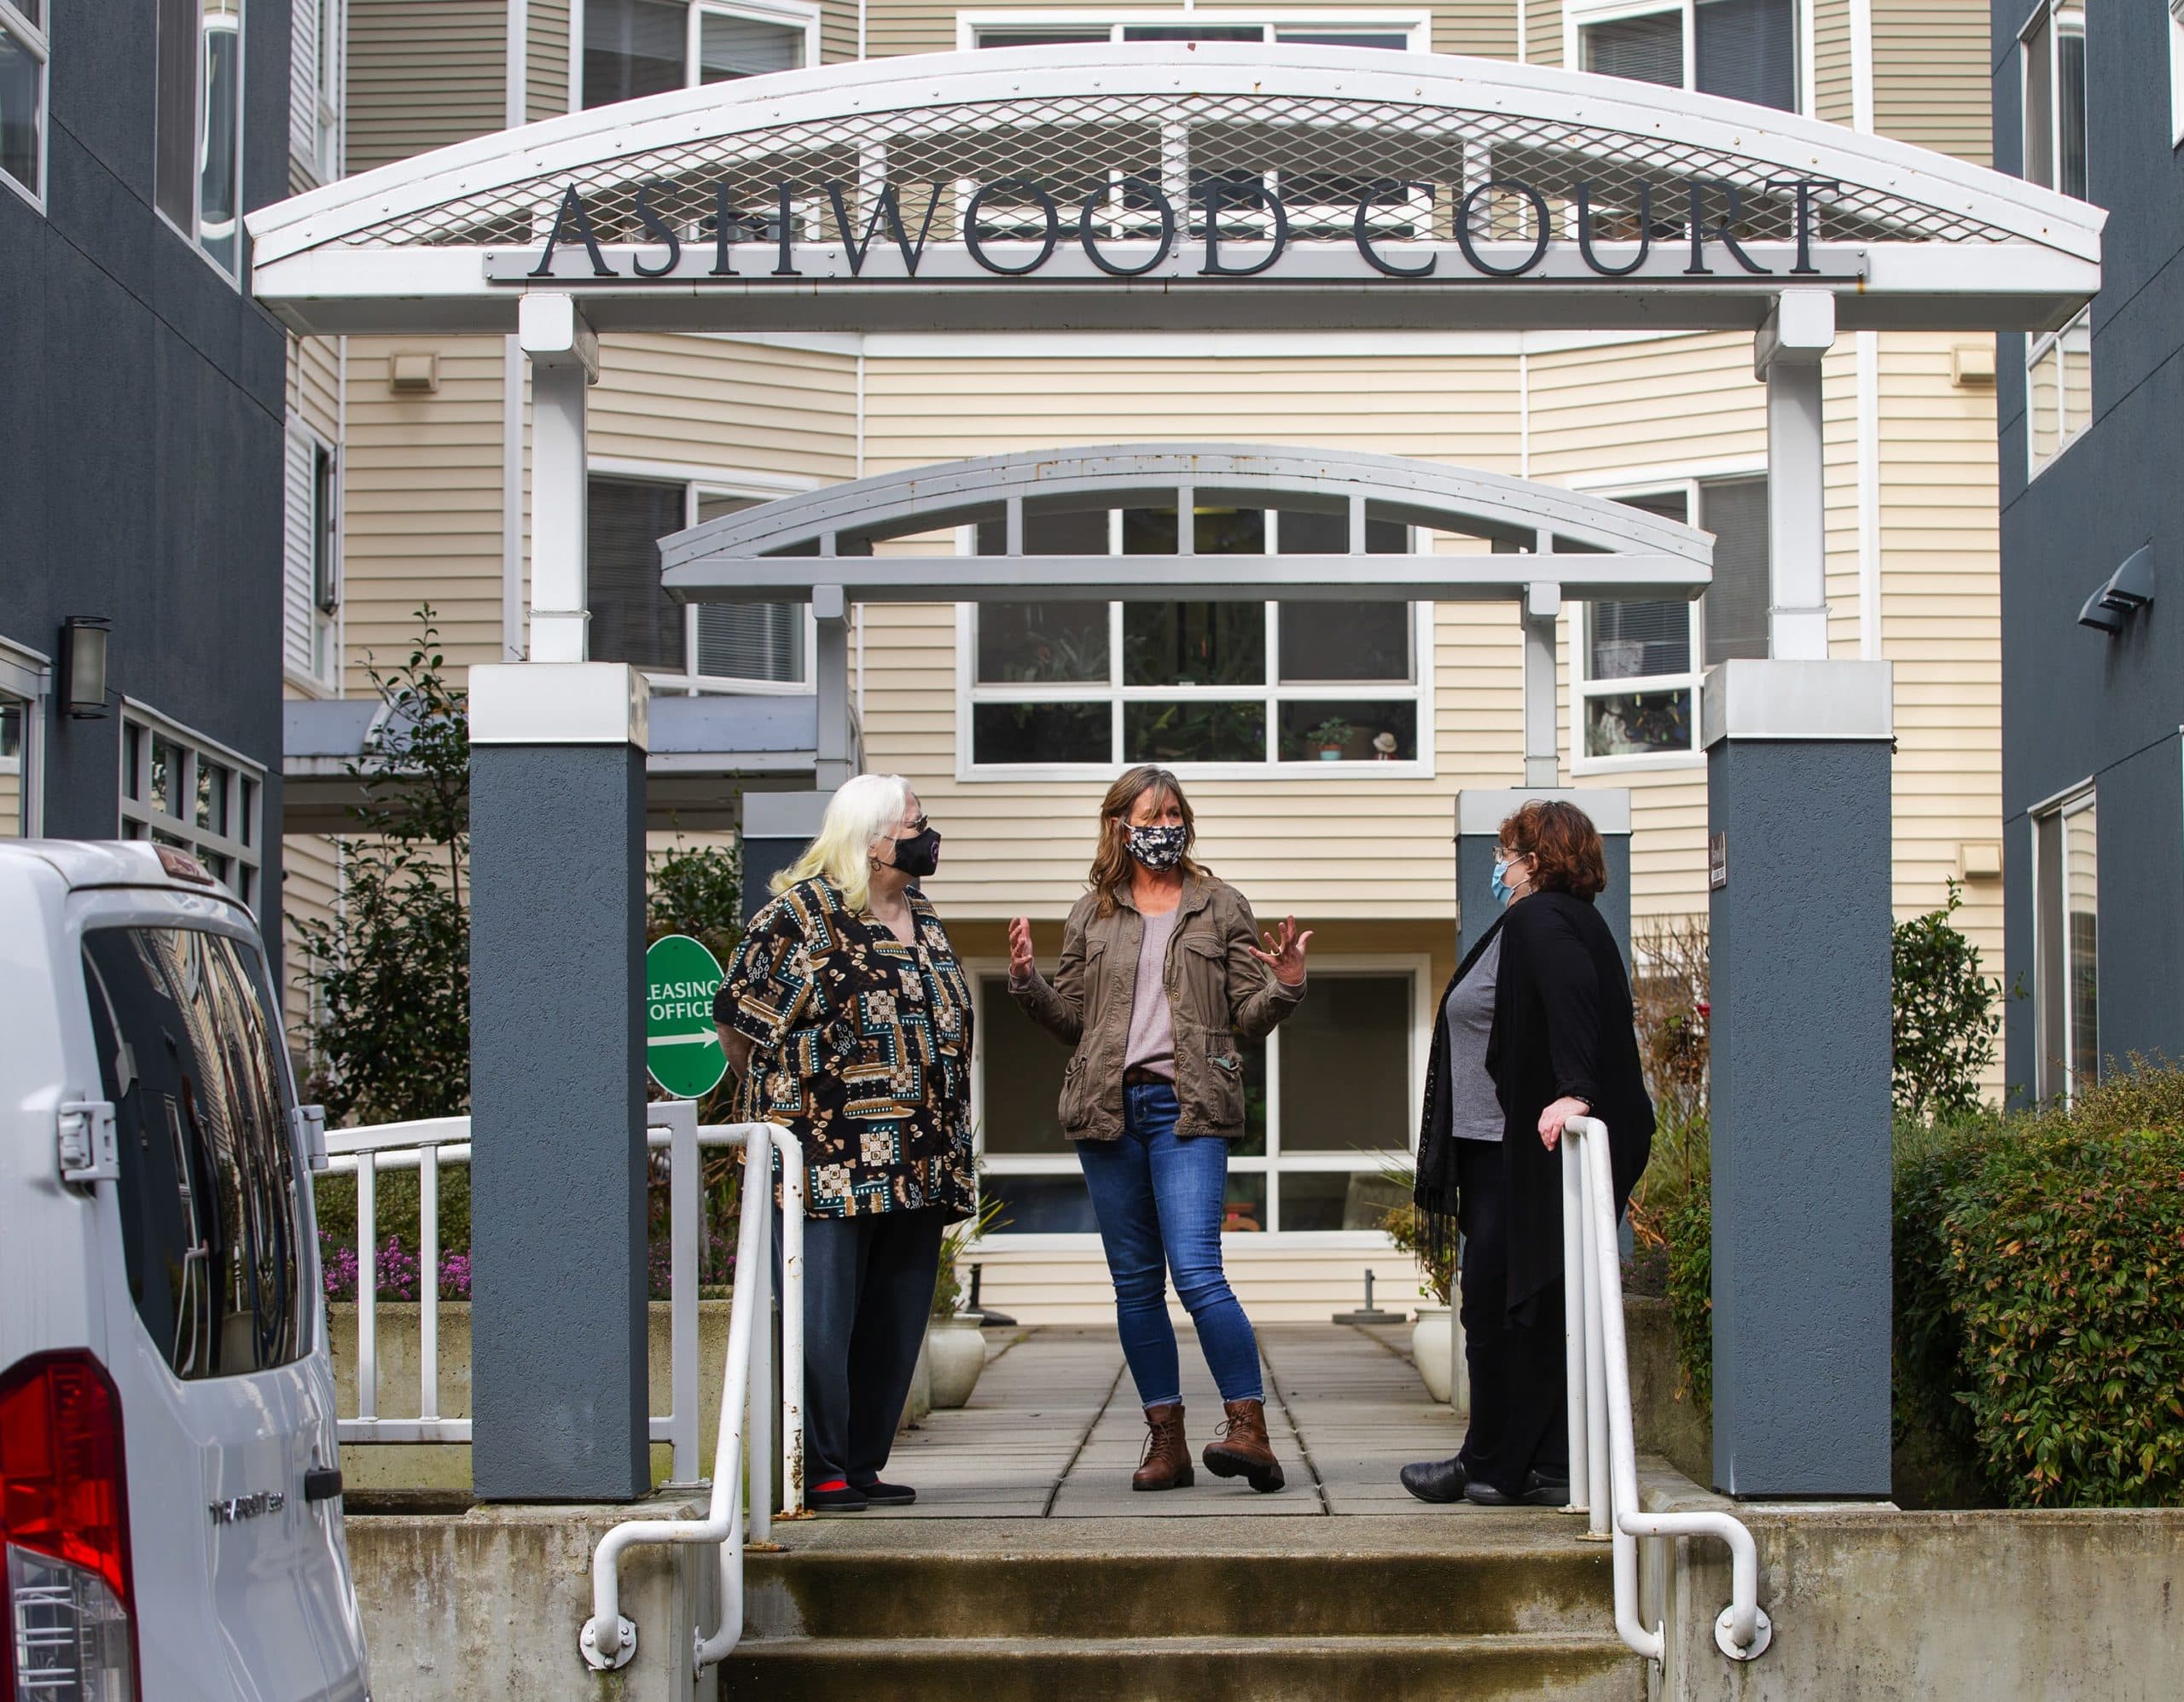 The Ashwood Court low-income housing apartments in Bellevue, Washington. Kim Loveall Price, center, director of the nonprofit that operates the units, talks with residents Susan Sherman, right, and Joyce Hansbearry. (Mike Seigel for WBUR)